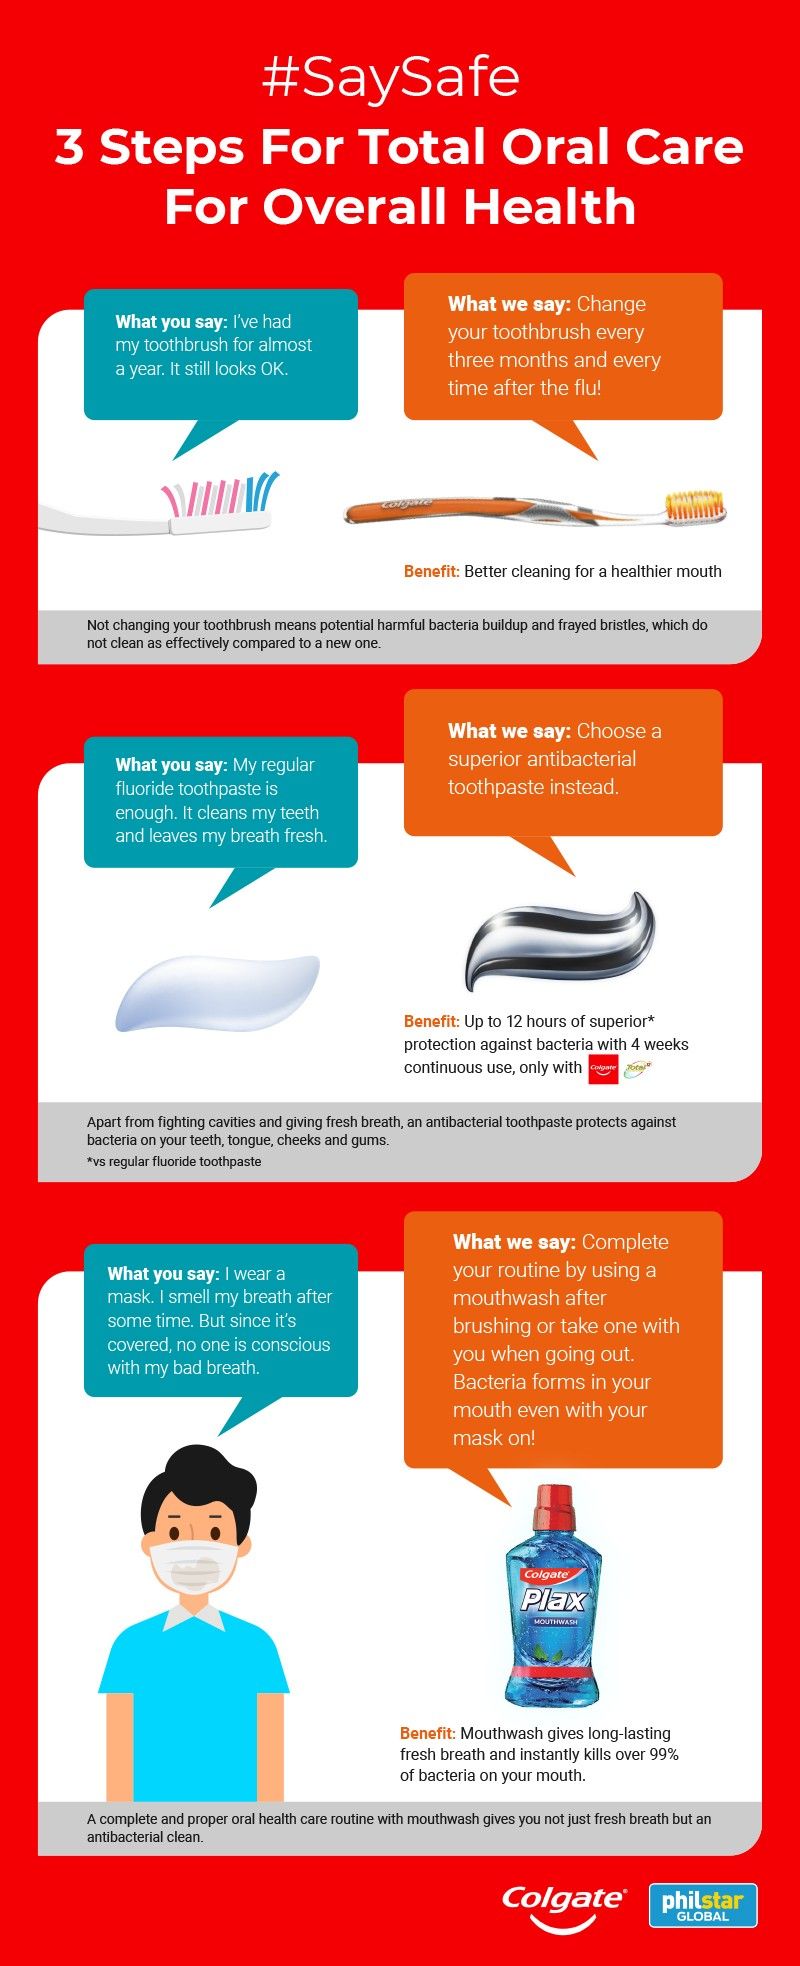 INFOGRAPHIC: Oral care tips for over all health this 2021